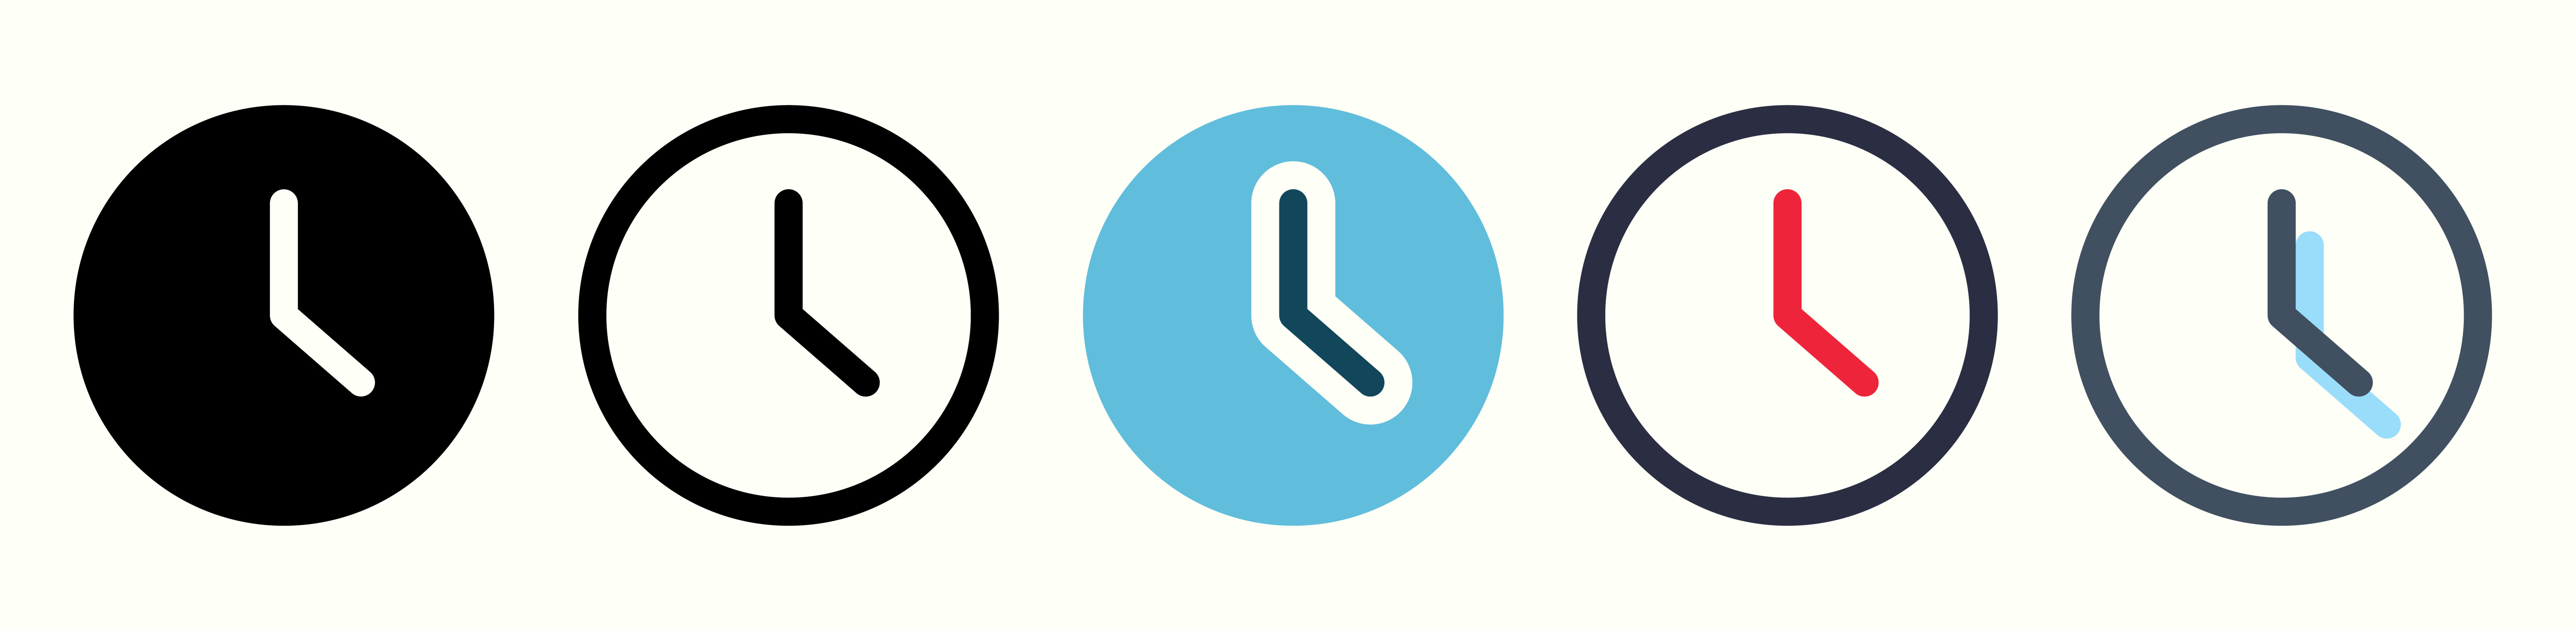 set of different colored clock icons